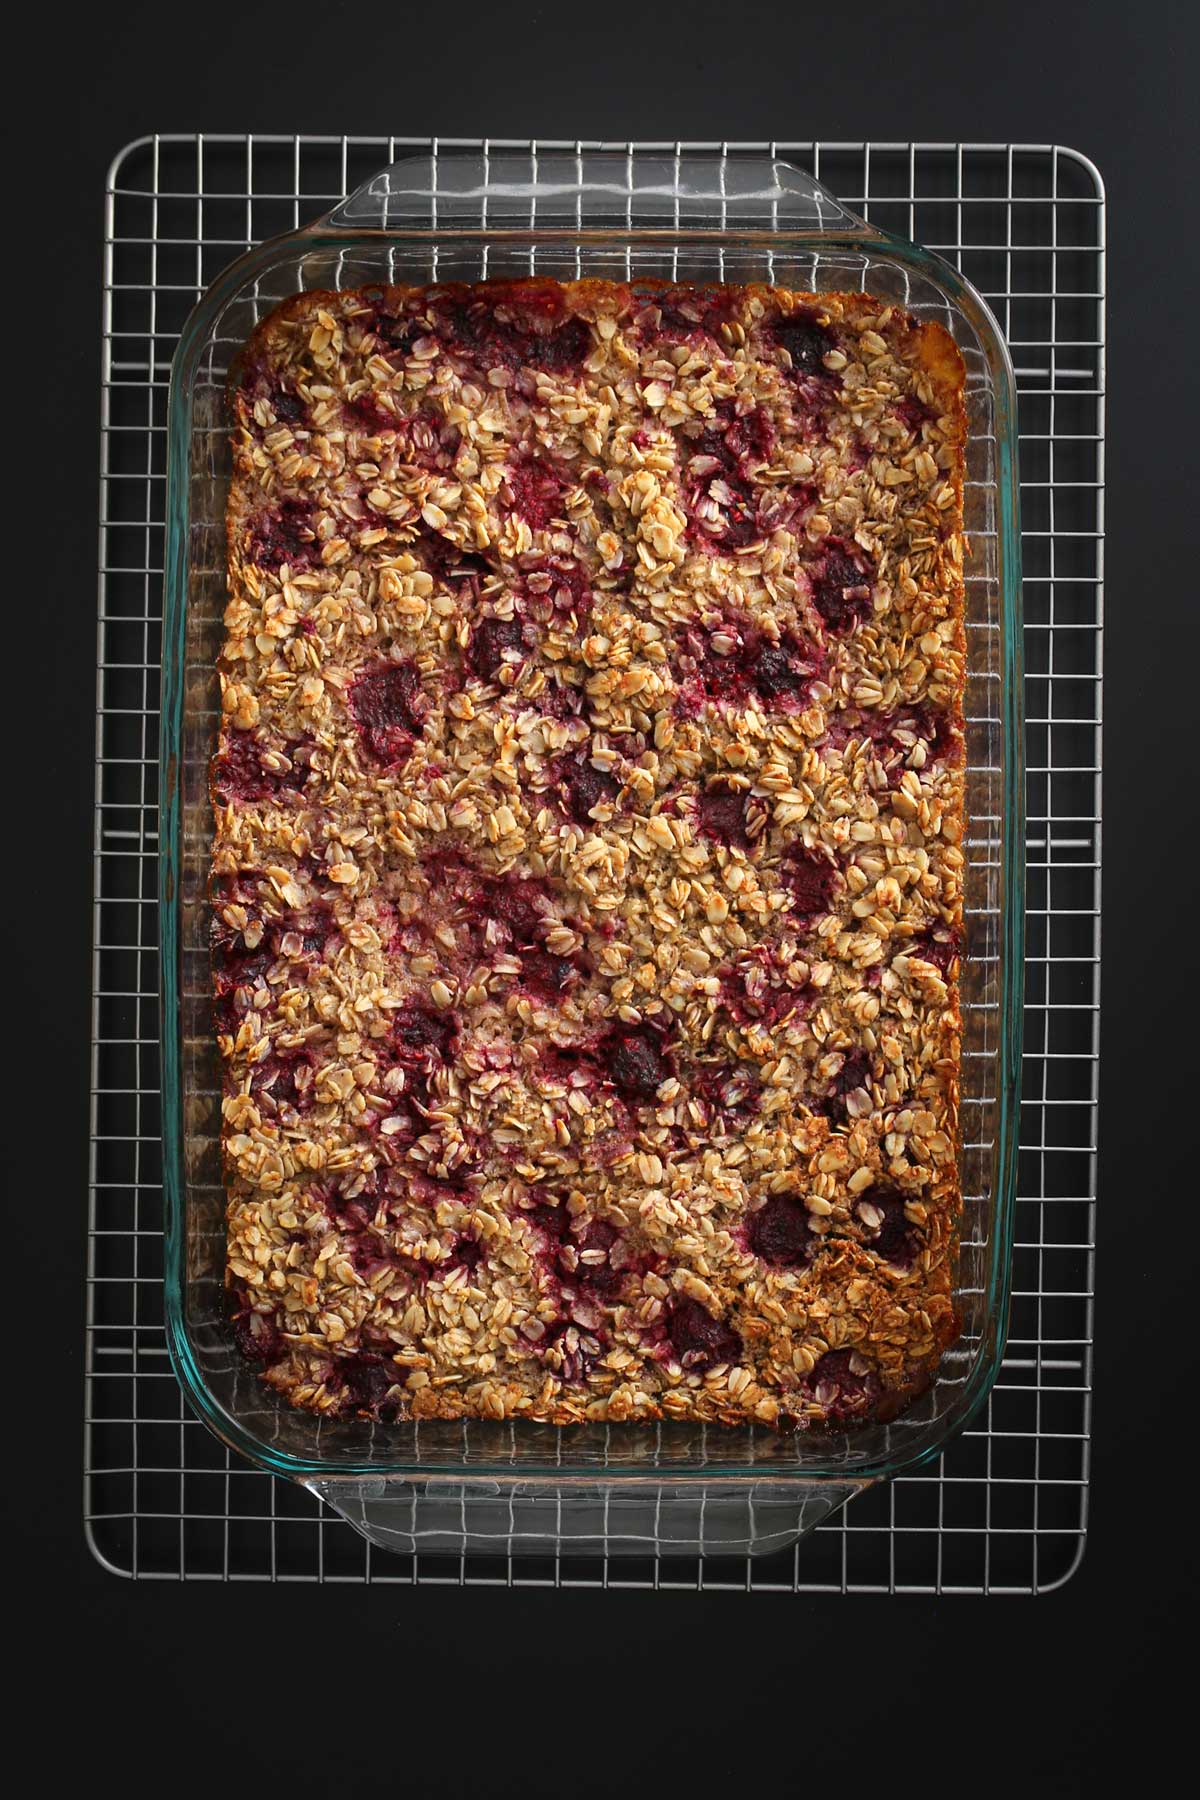 vegan baked oatmeal cooling on wire rack in its pan.